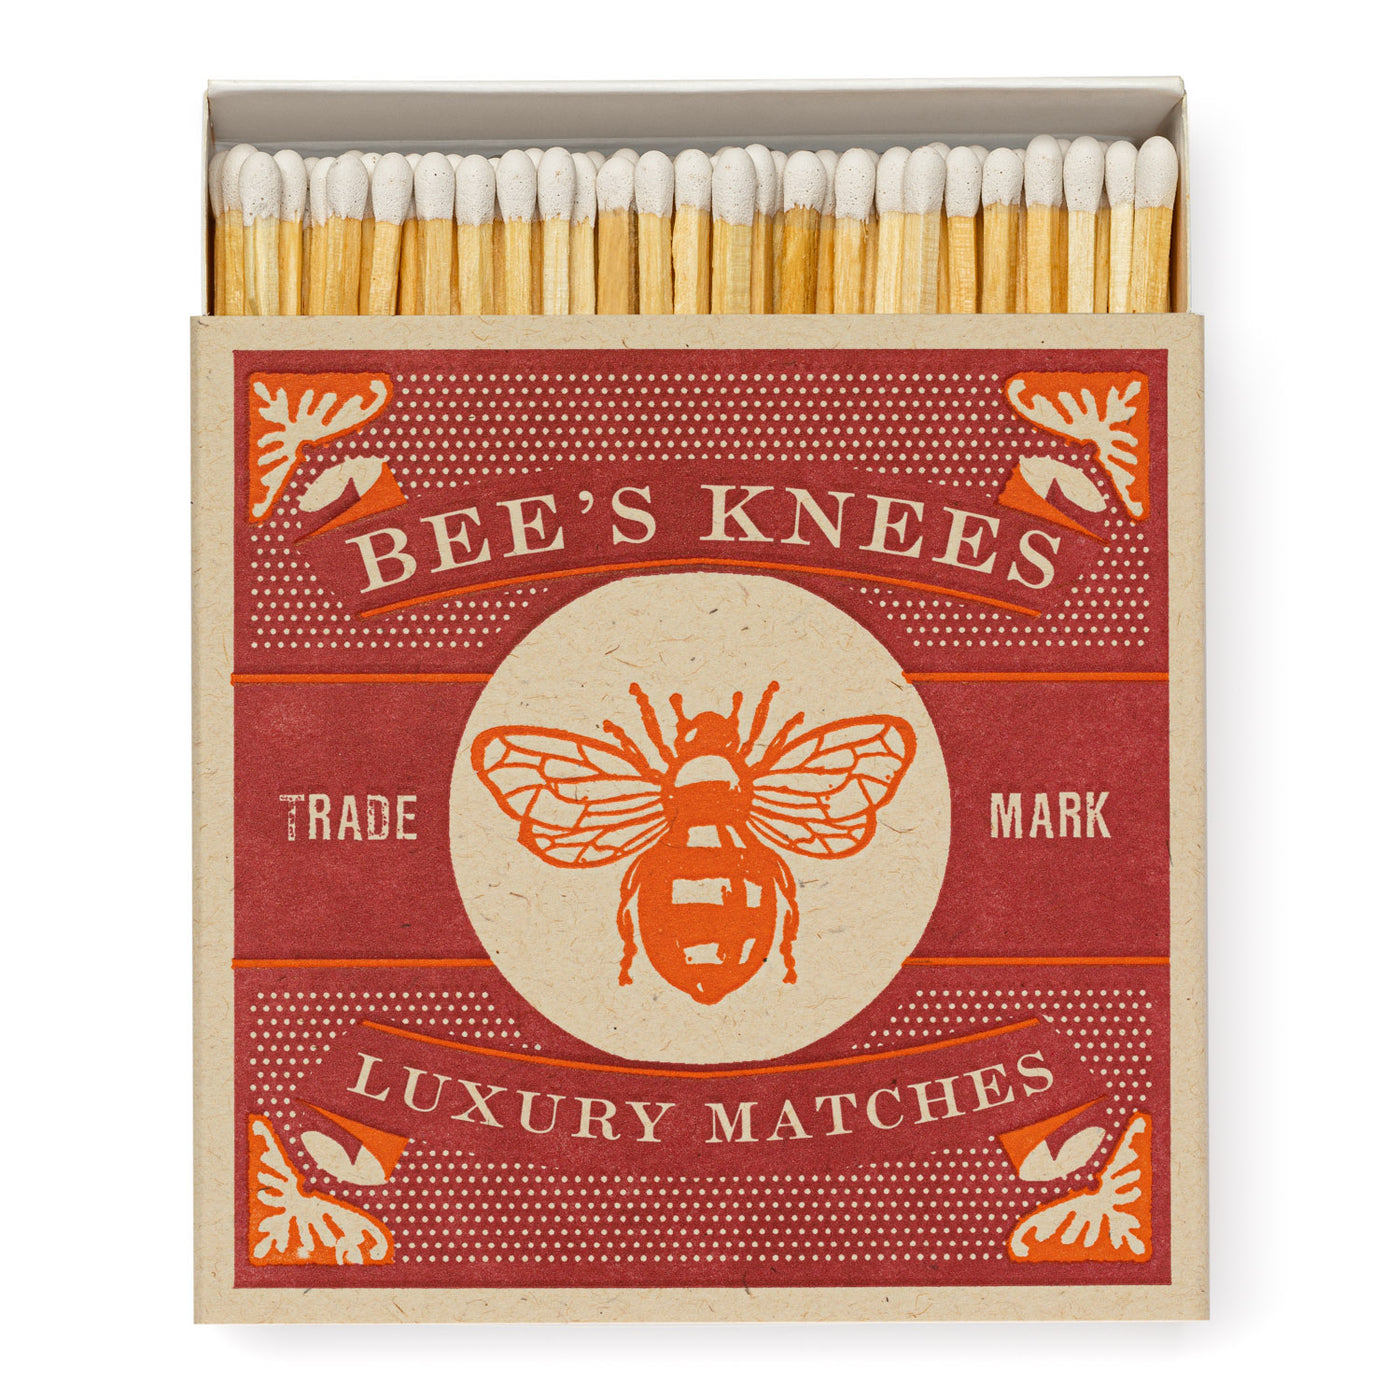 Bees Knees Safety Matches